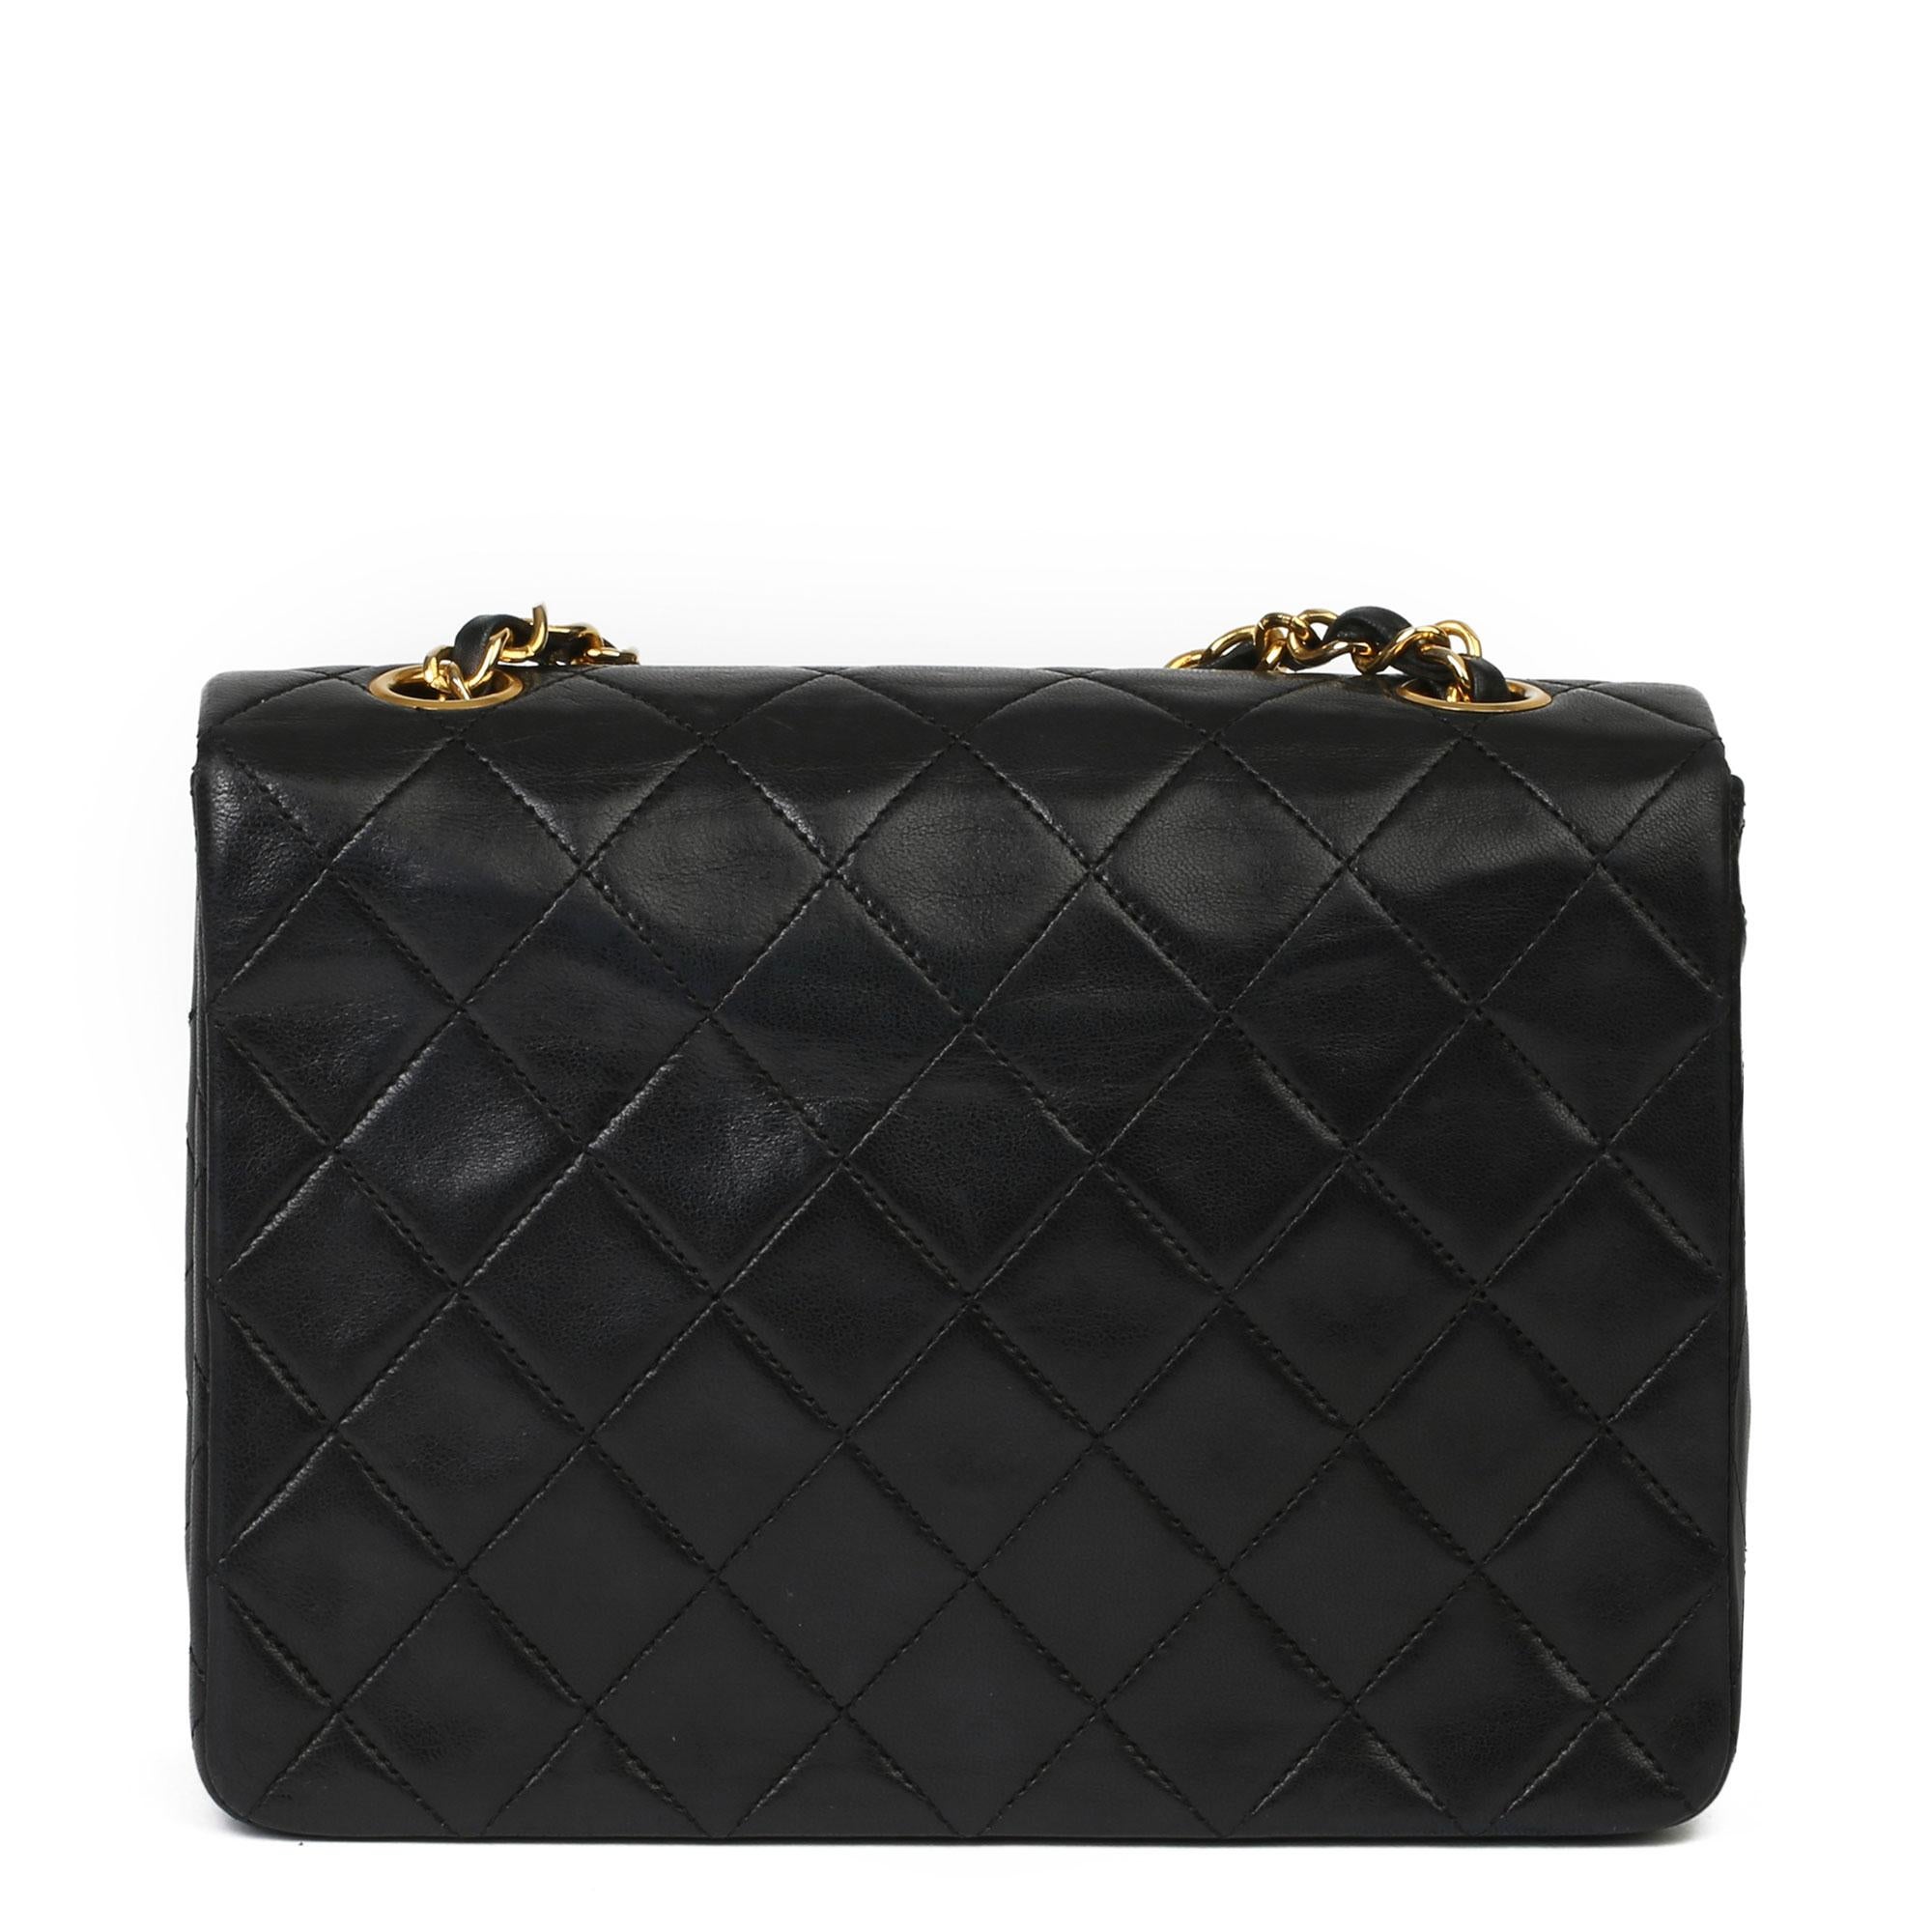 1996 Chanel Black Quilted Lambskin Mini Flap Bag  9